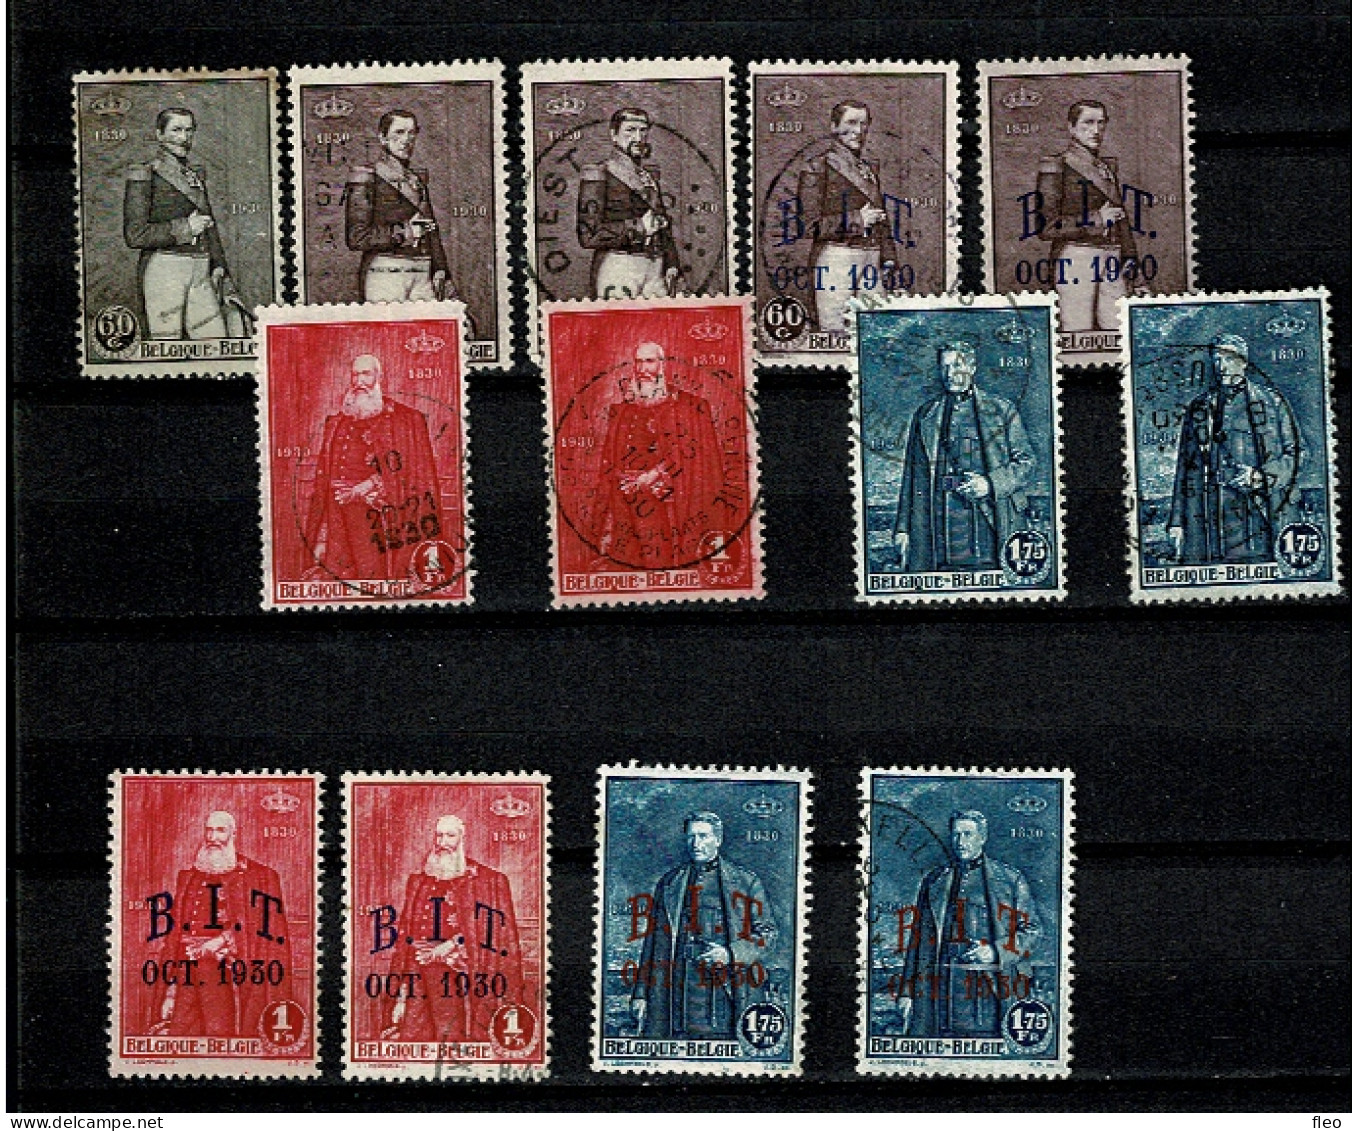 1930 302 303 304 306 & 307 (LOT TIMBRES° 13x °) EEUWFEEST & B.I.T - Usados